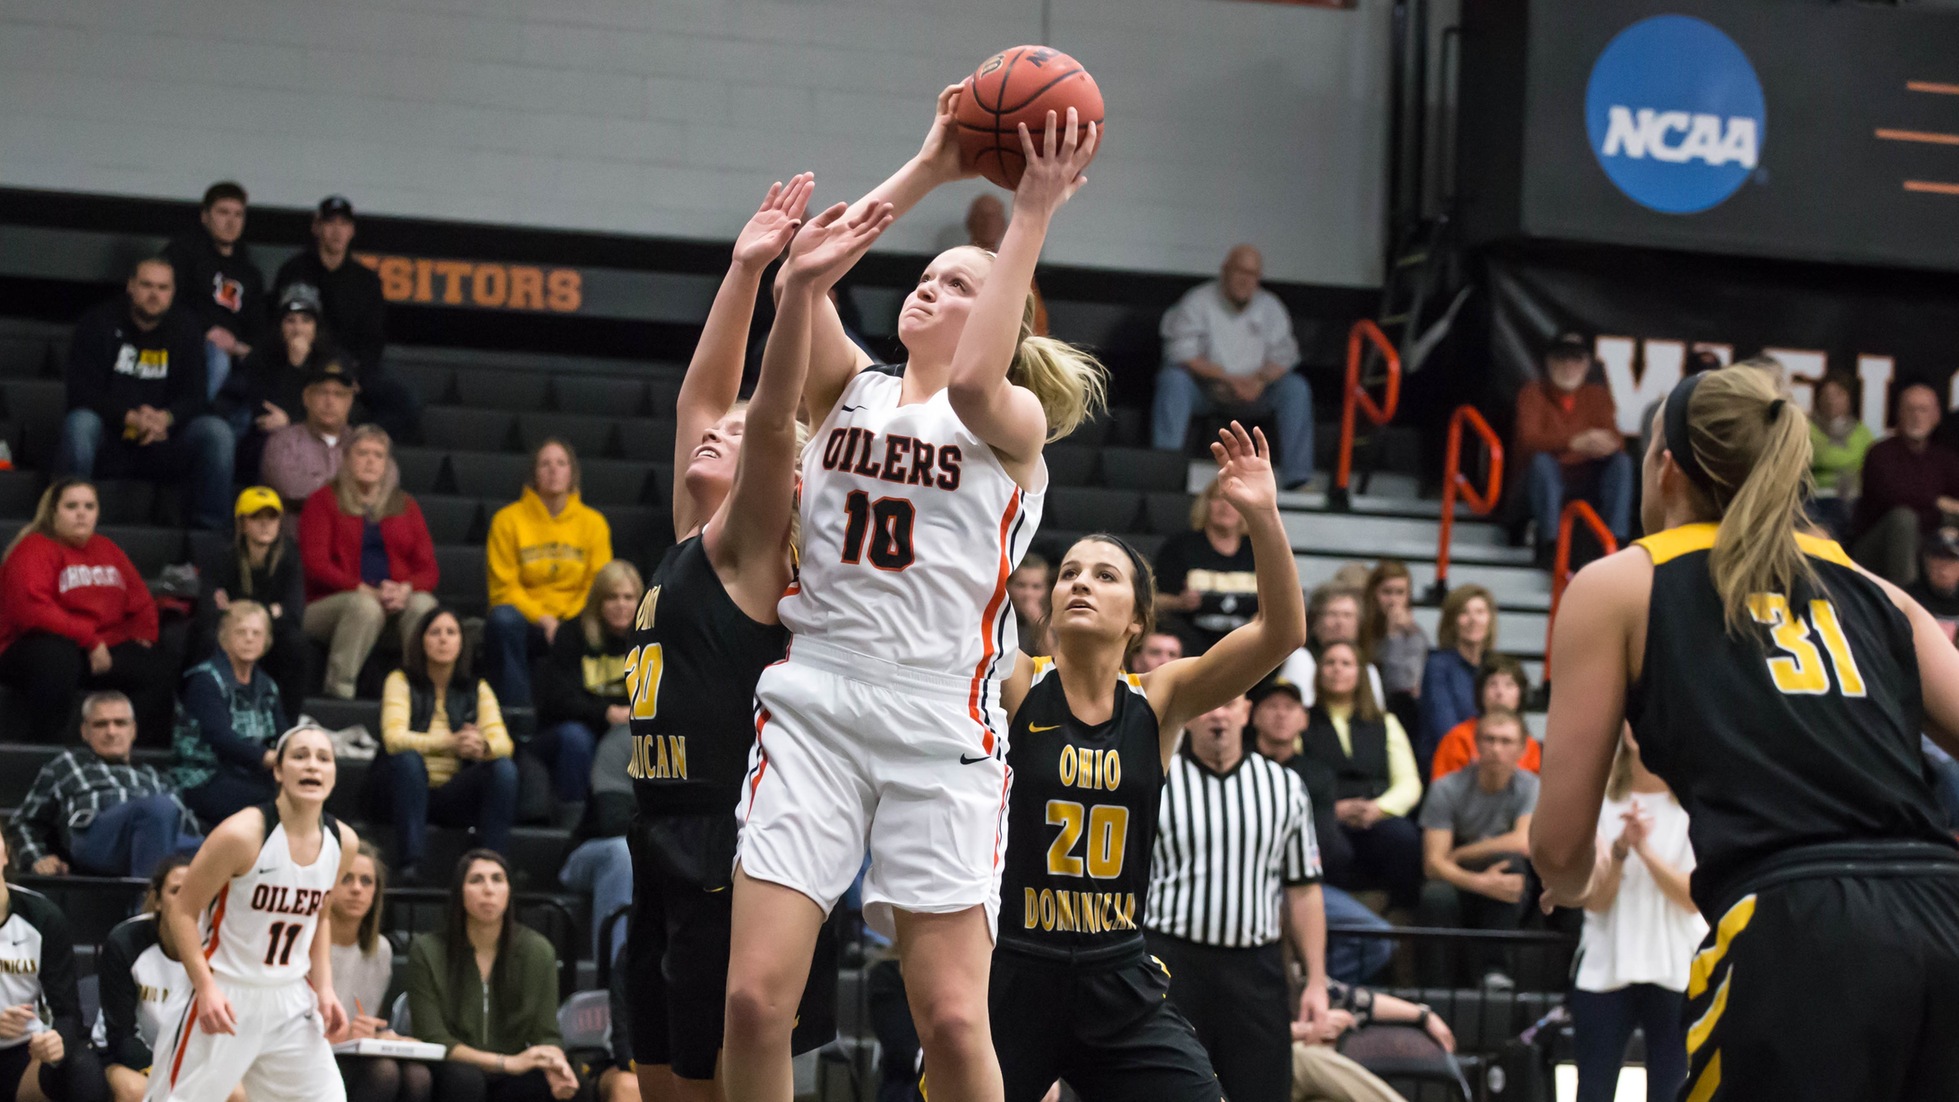 Oilers Stumble at Hillsdale